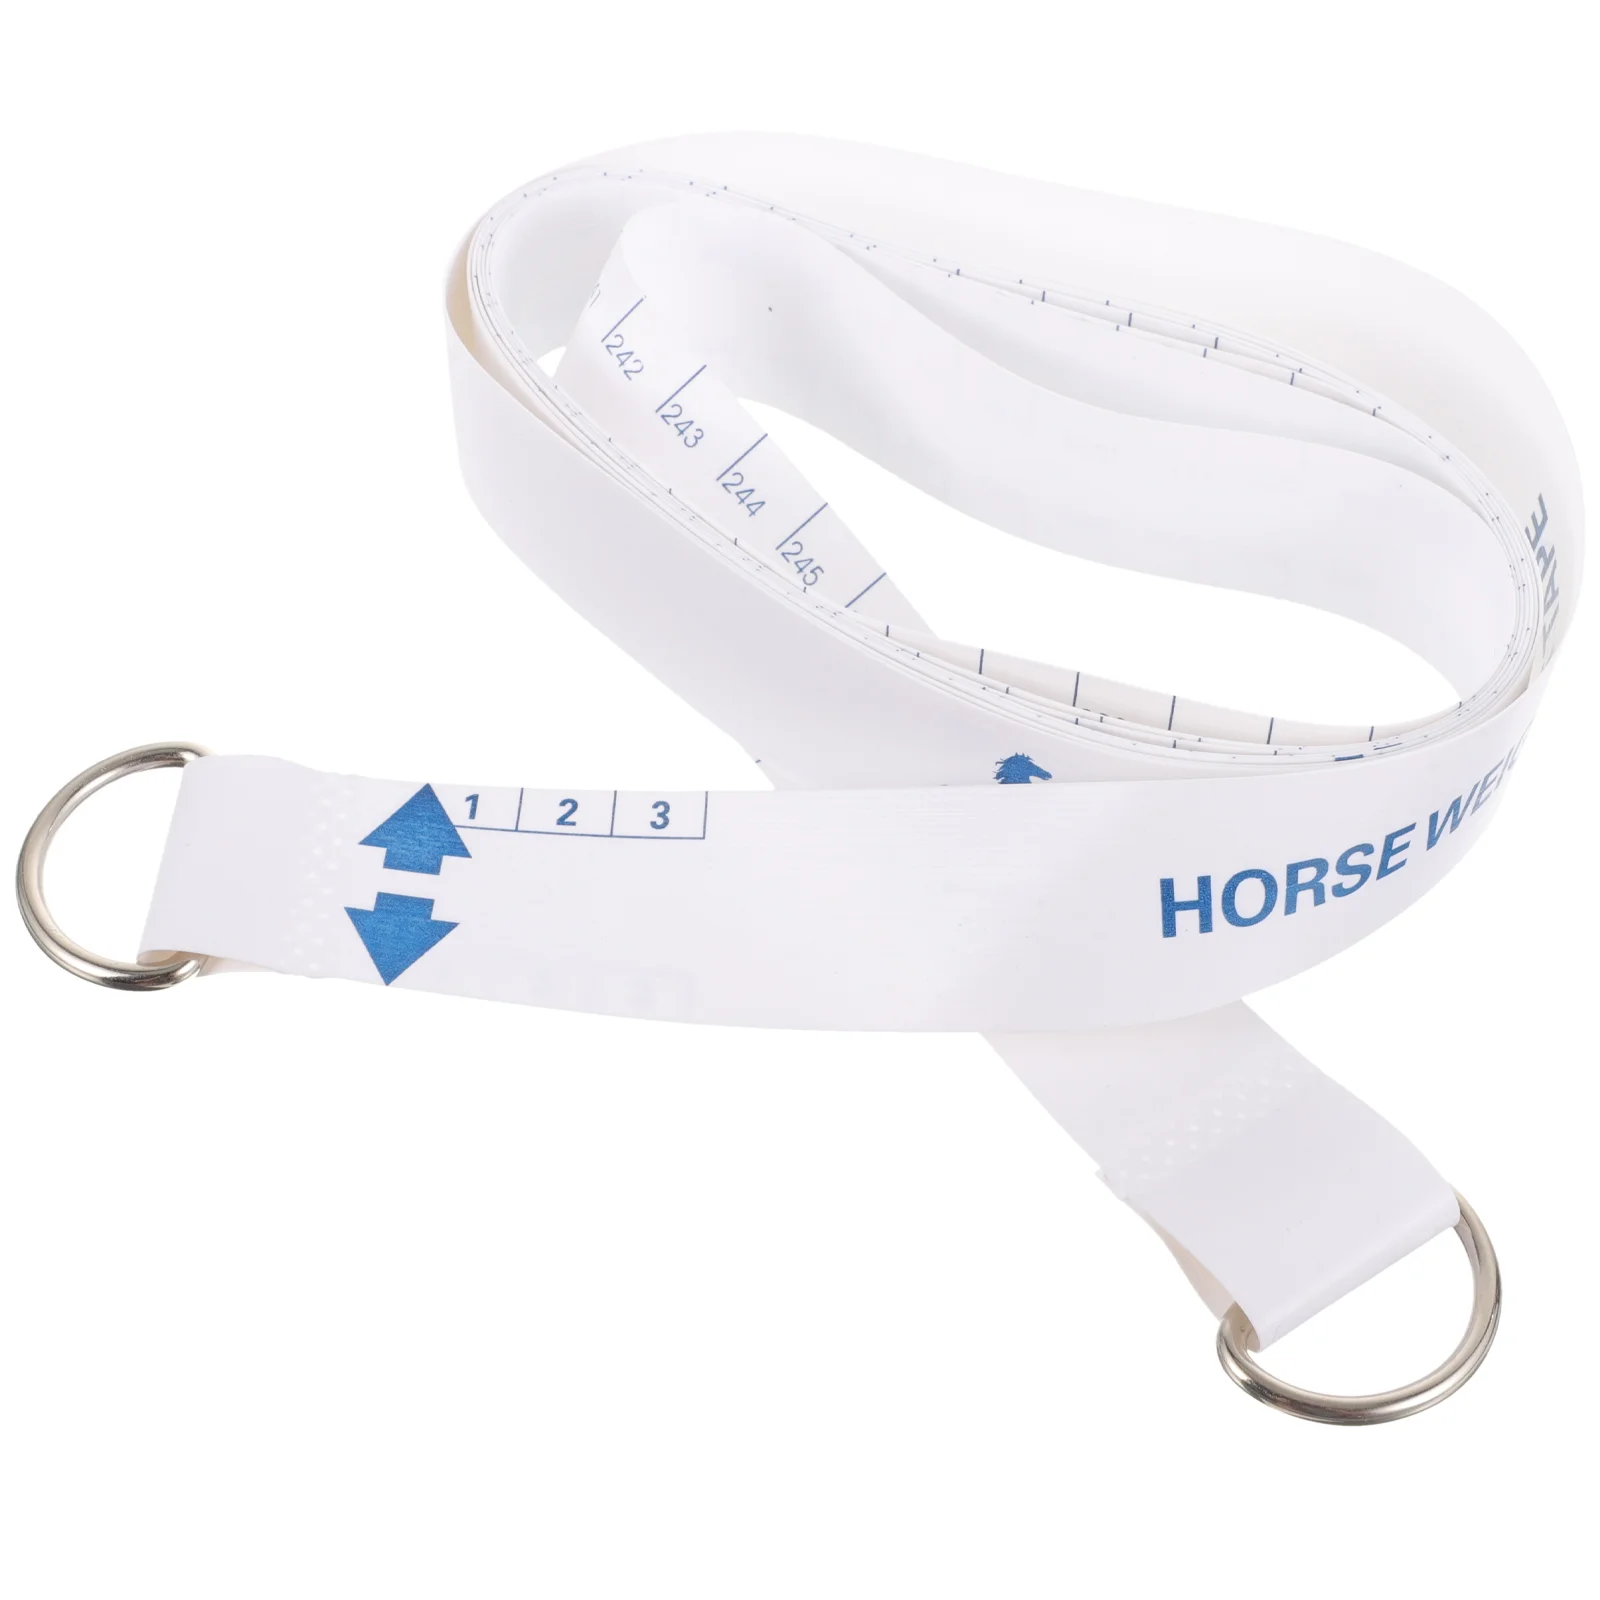 

Professional Horse Measure Tape Flexible Tape Measure Convenient Measuring Tape Horse Weight Tape